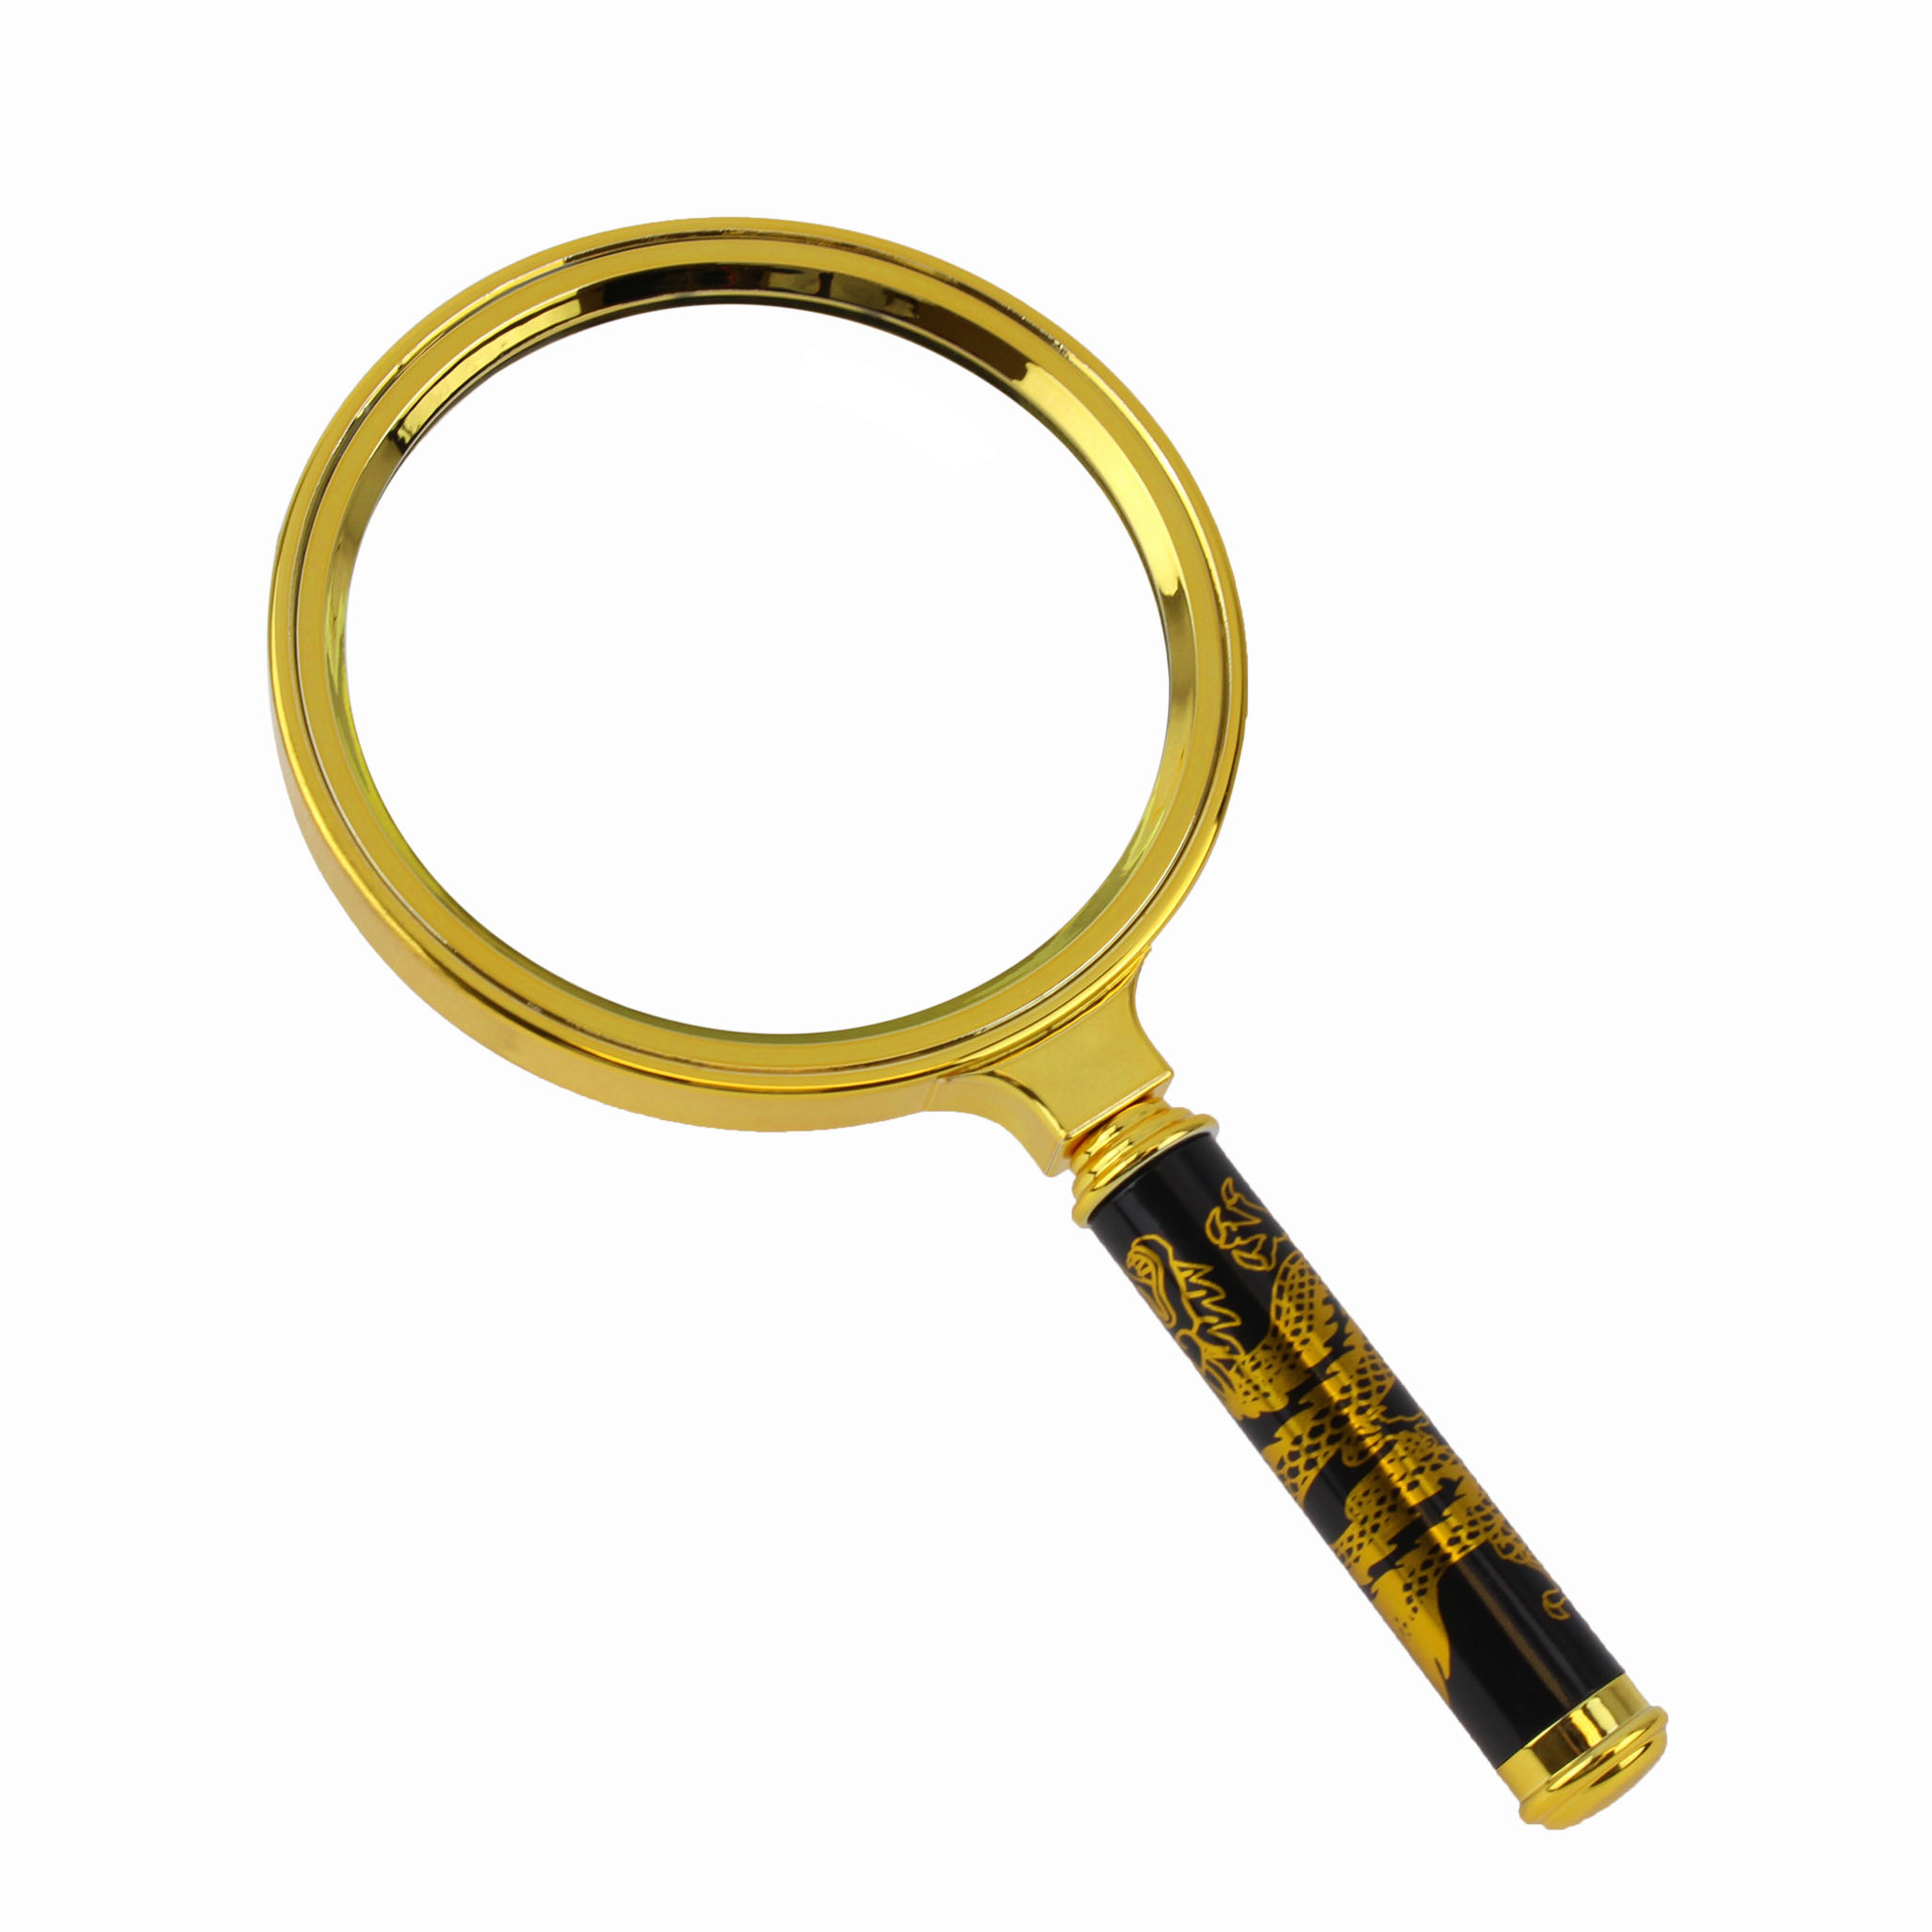 Smiling JuJu 2 pack of 90mm 10X Handheld Magnifiers - Magnifying Glass with  Glossy, Golden Dragon